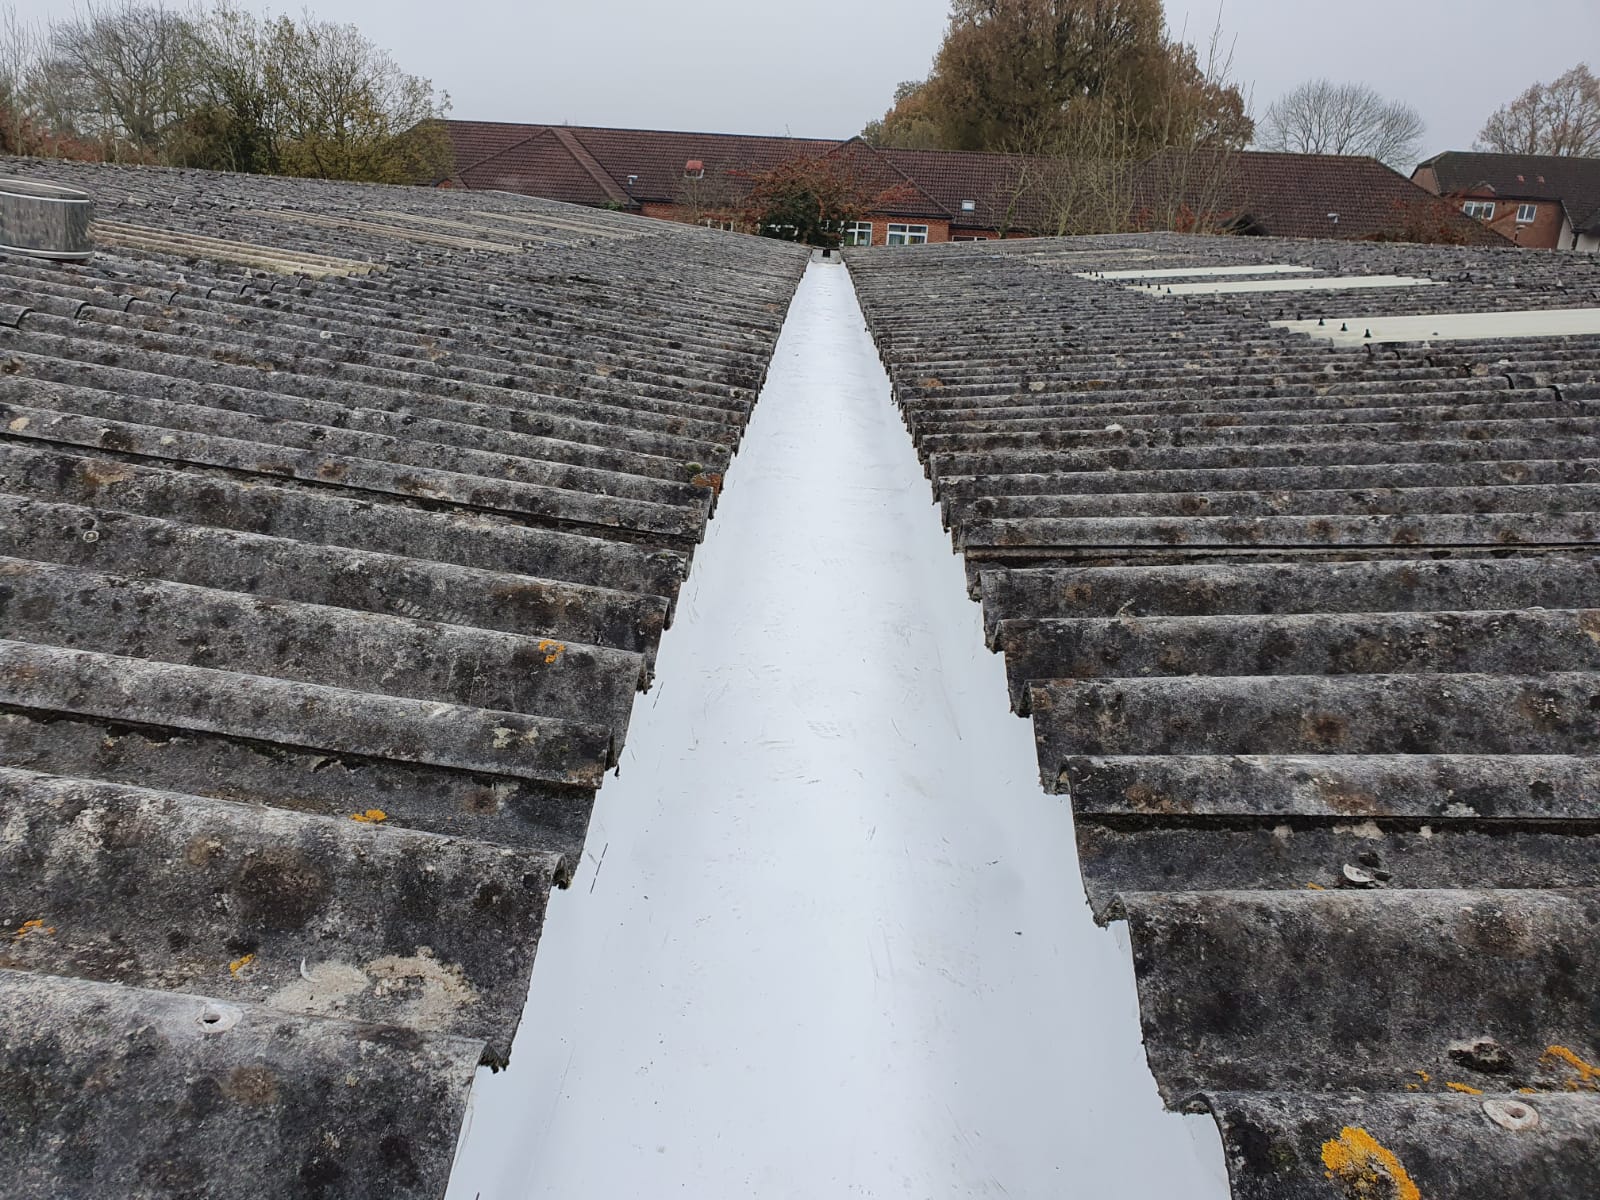 Repair Work to the Gutters and Roof on an Office Warehouse Roof in Edenbridge, Kent